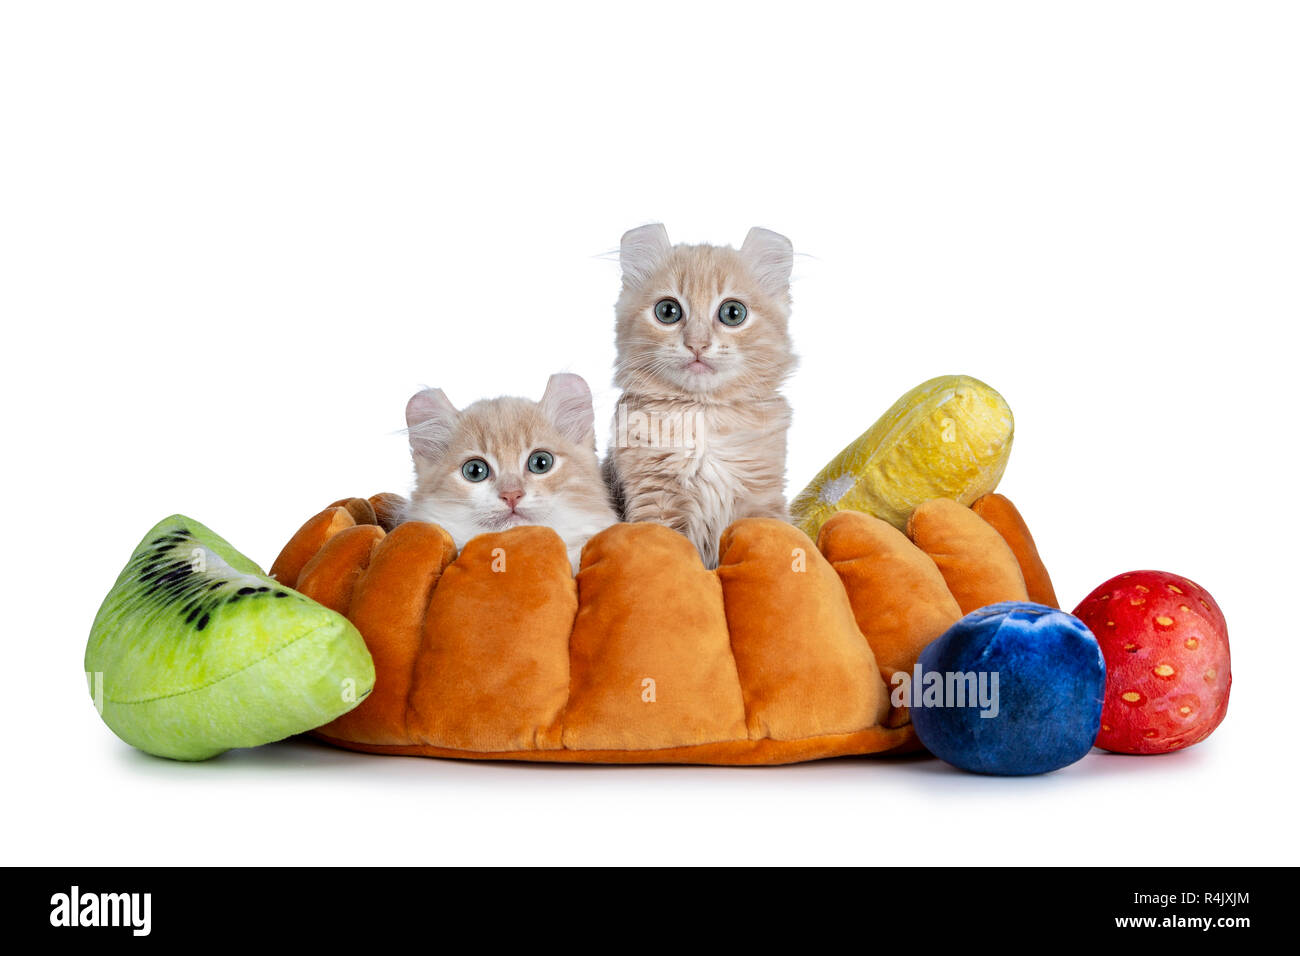 Two cream with white American Curl cat kittens sitting in fake pie crust with pieces of fruit. Looking at camera with grey / blue eyes. Isolated on wh Stock Photo